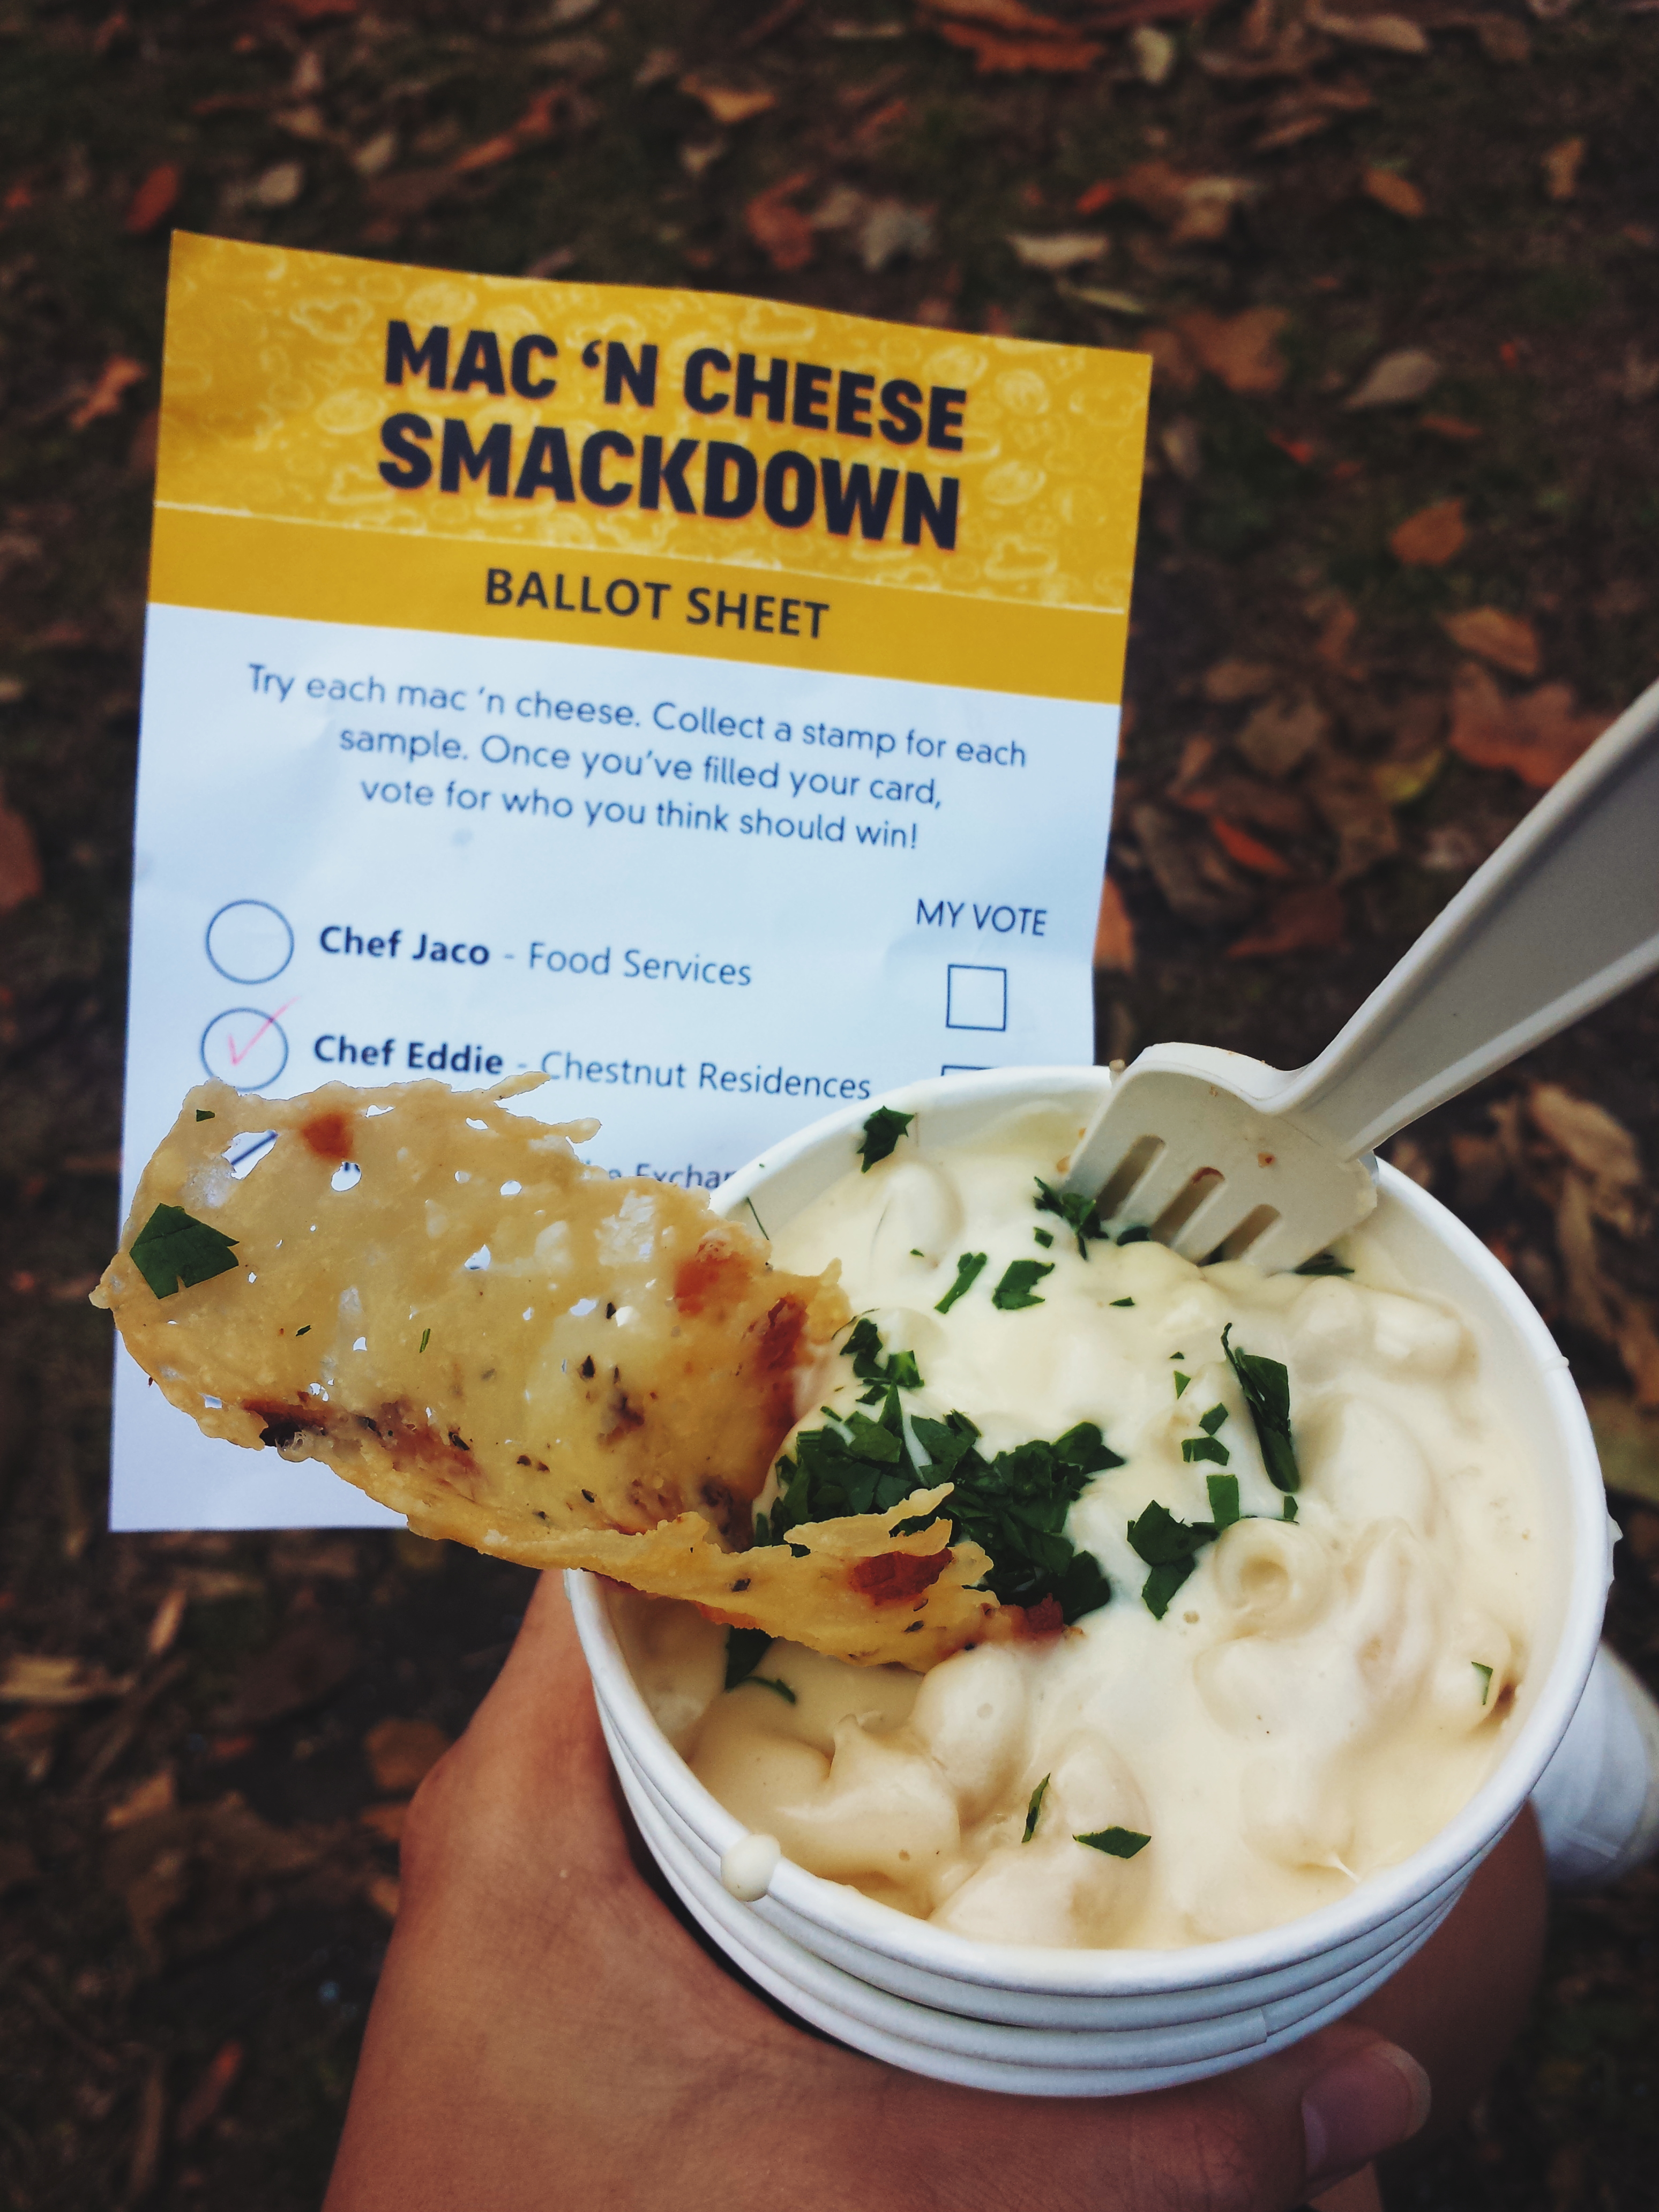 Me holding a paper bowl filled with mac and cheese and a fried cheese fritter on top. In the background is the ballot sheet with all the names of the chefs who participated in the event.